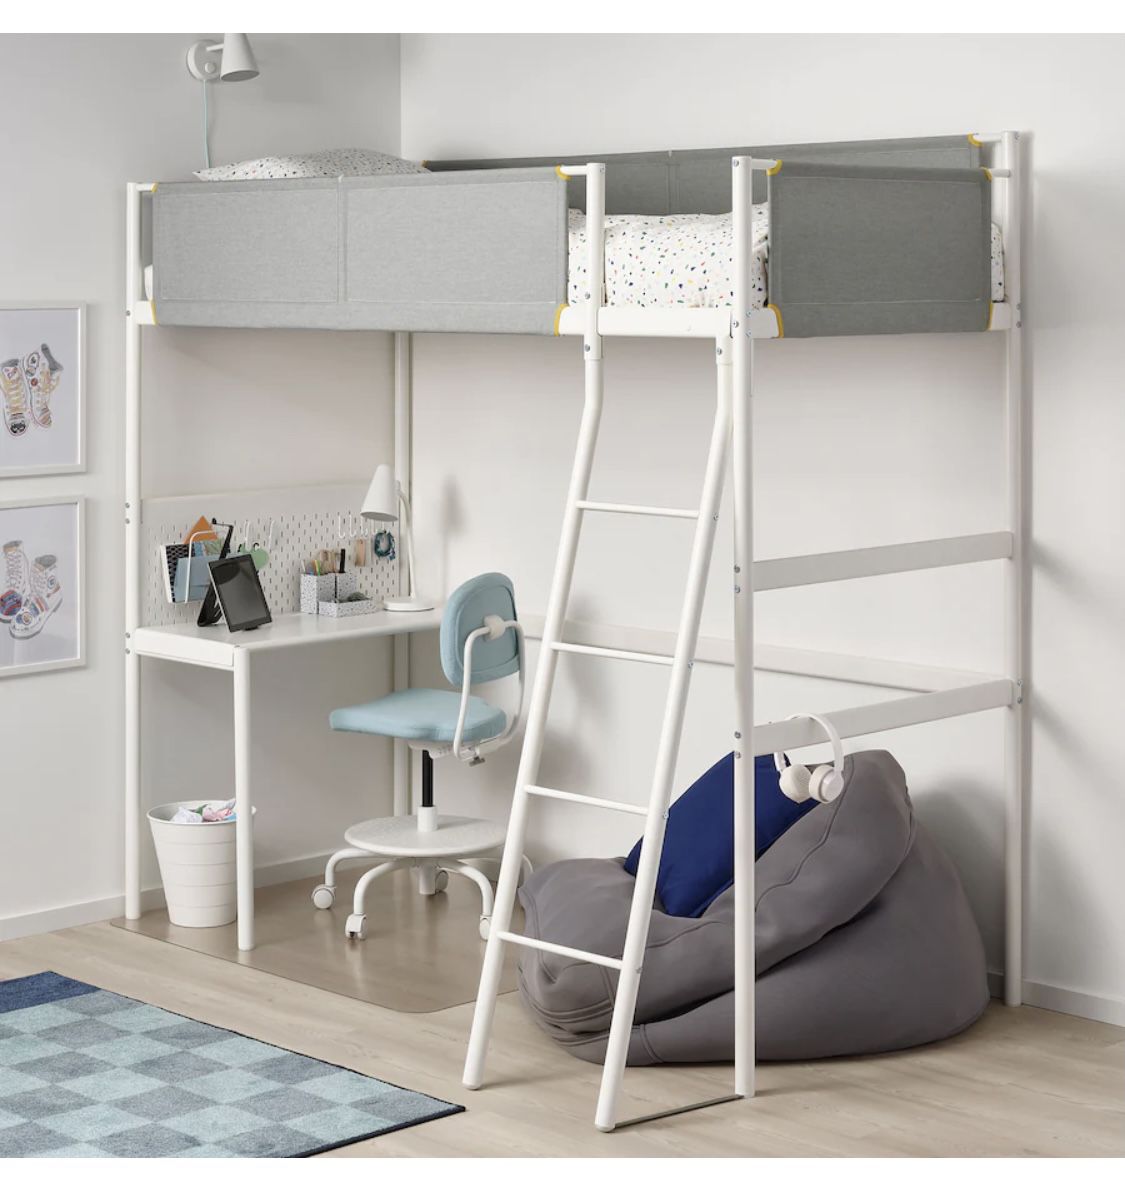 2 Lofted Bunk Beds With Desk